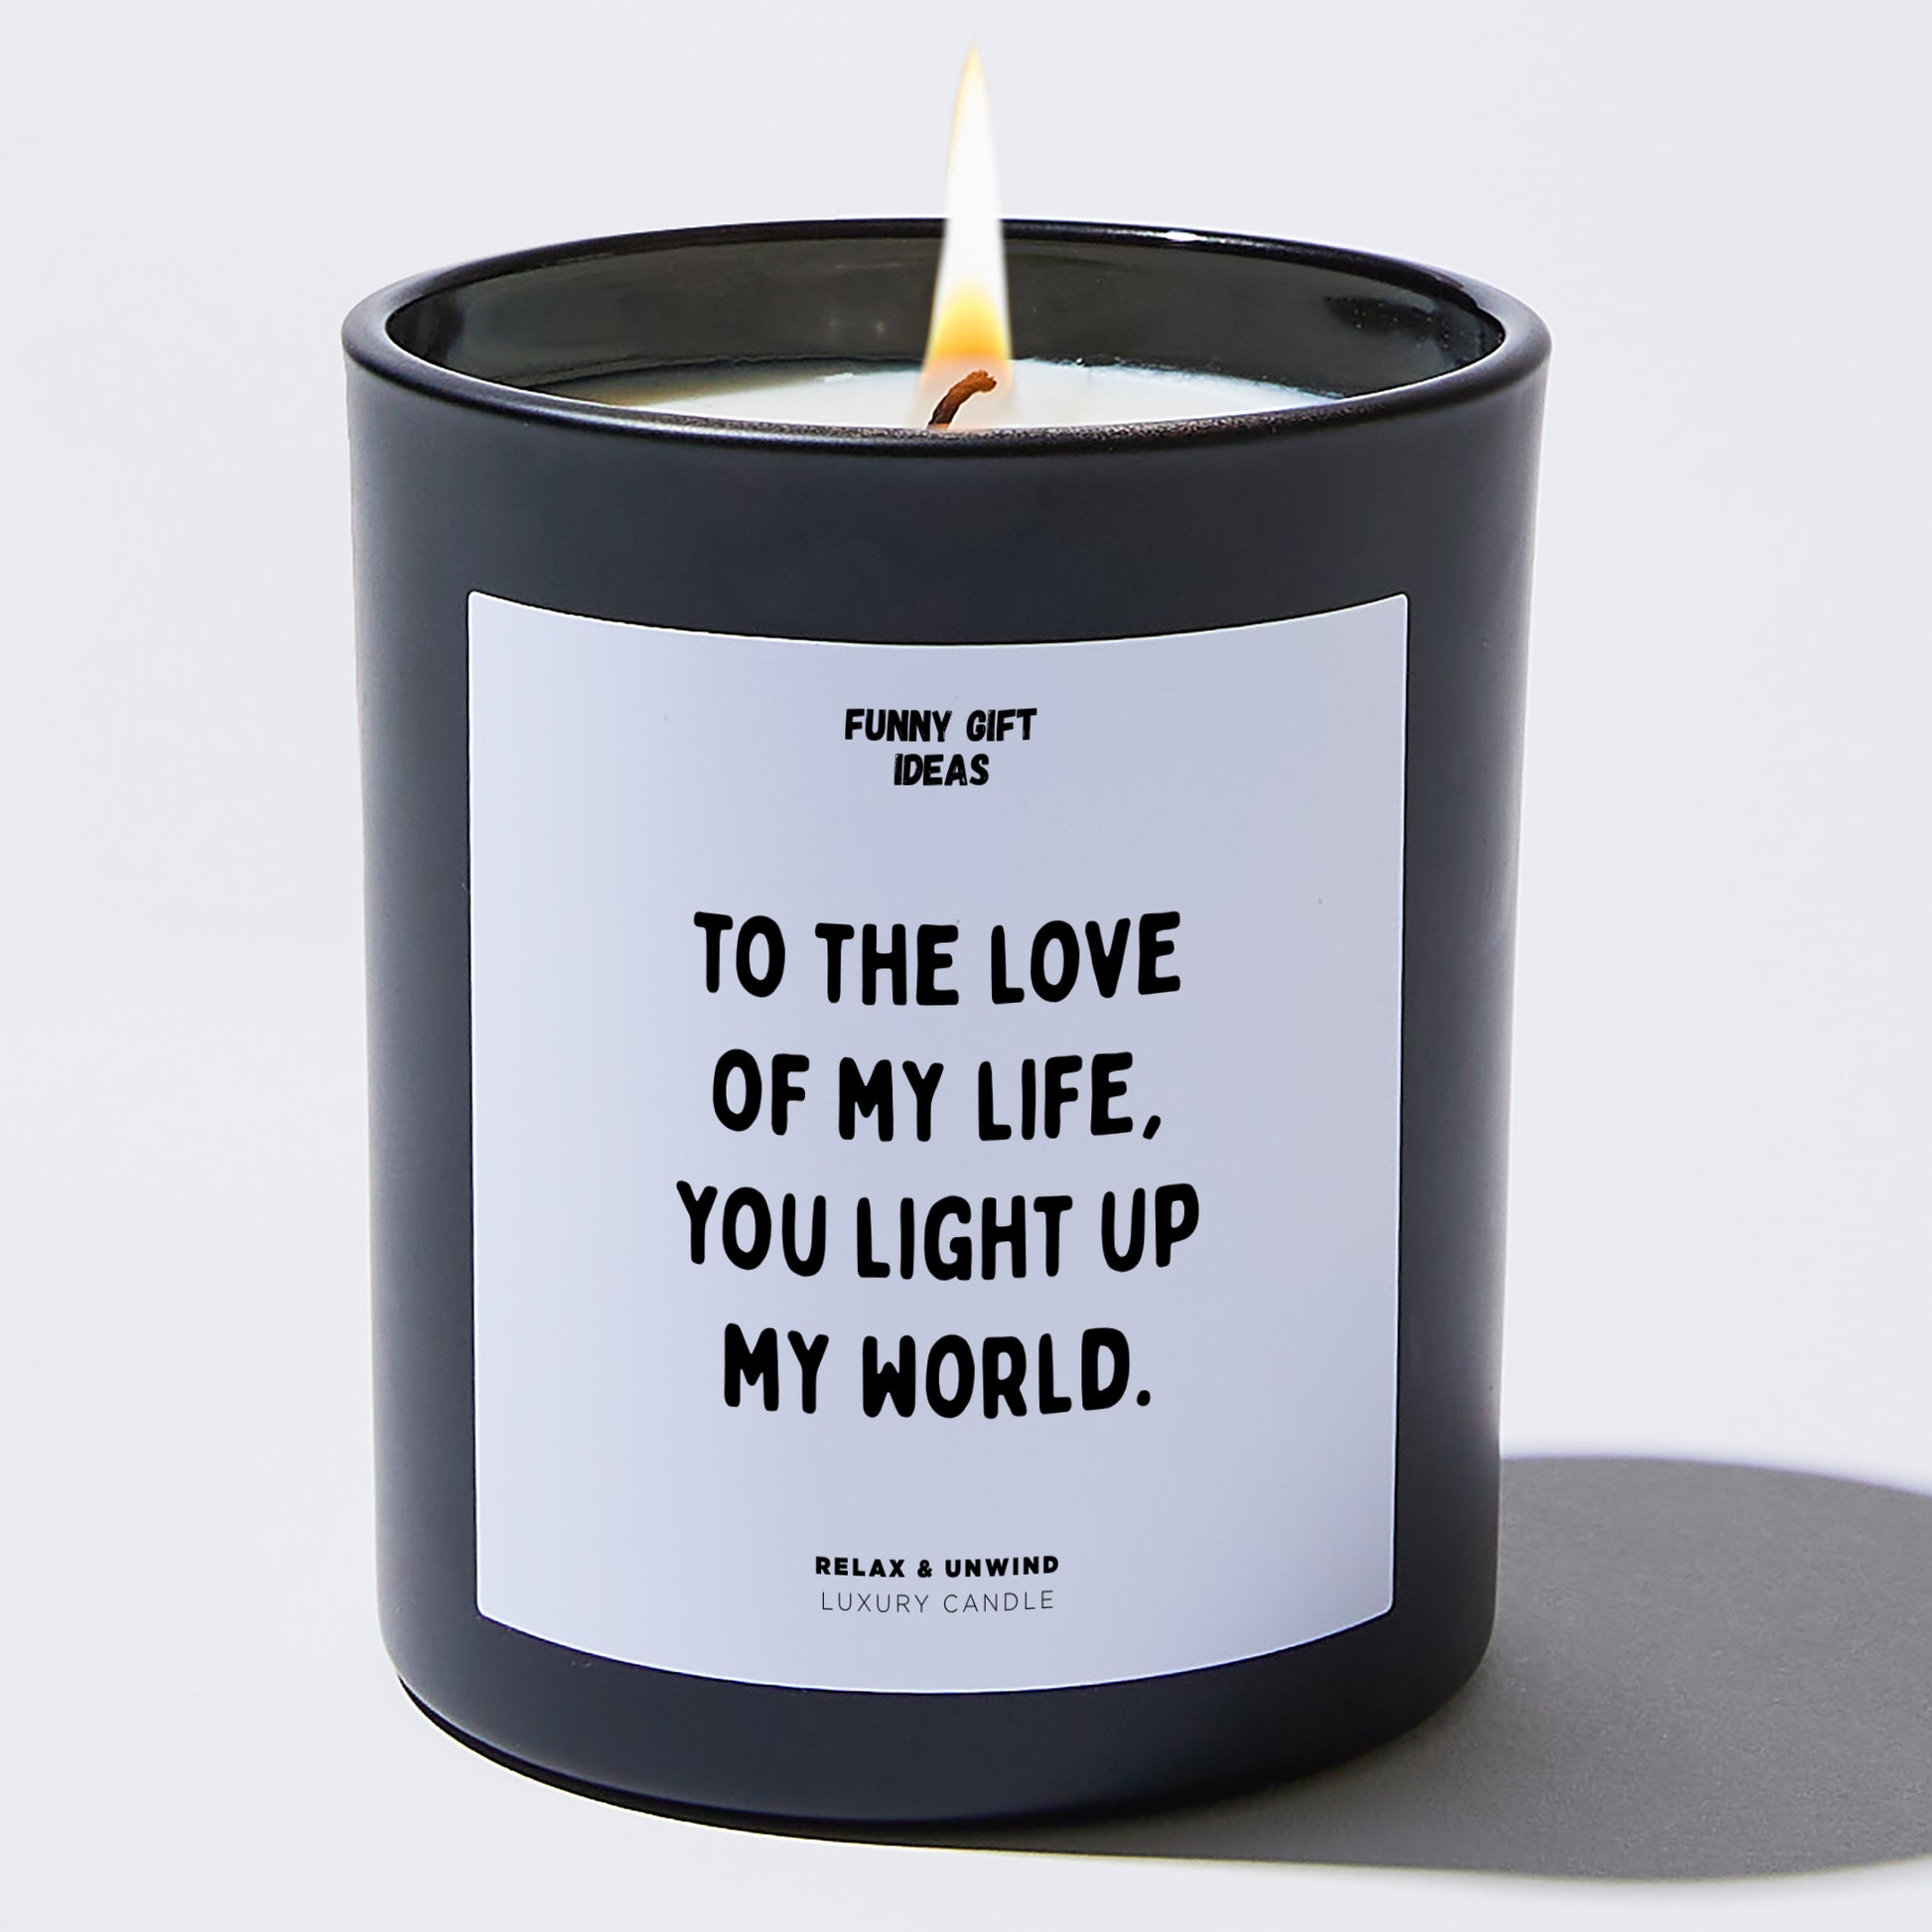 Anniversary To the Love of My Life, You Light Up My World. - Funny Gift Ideas